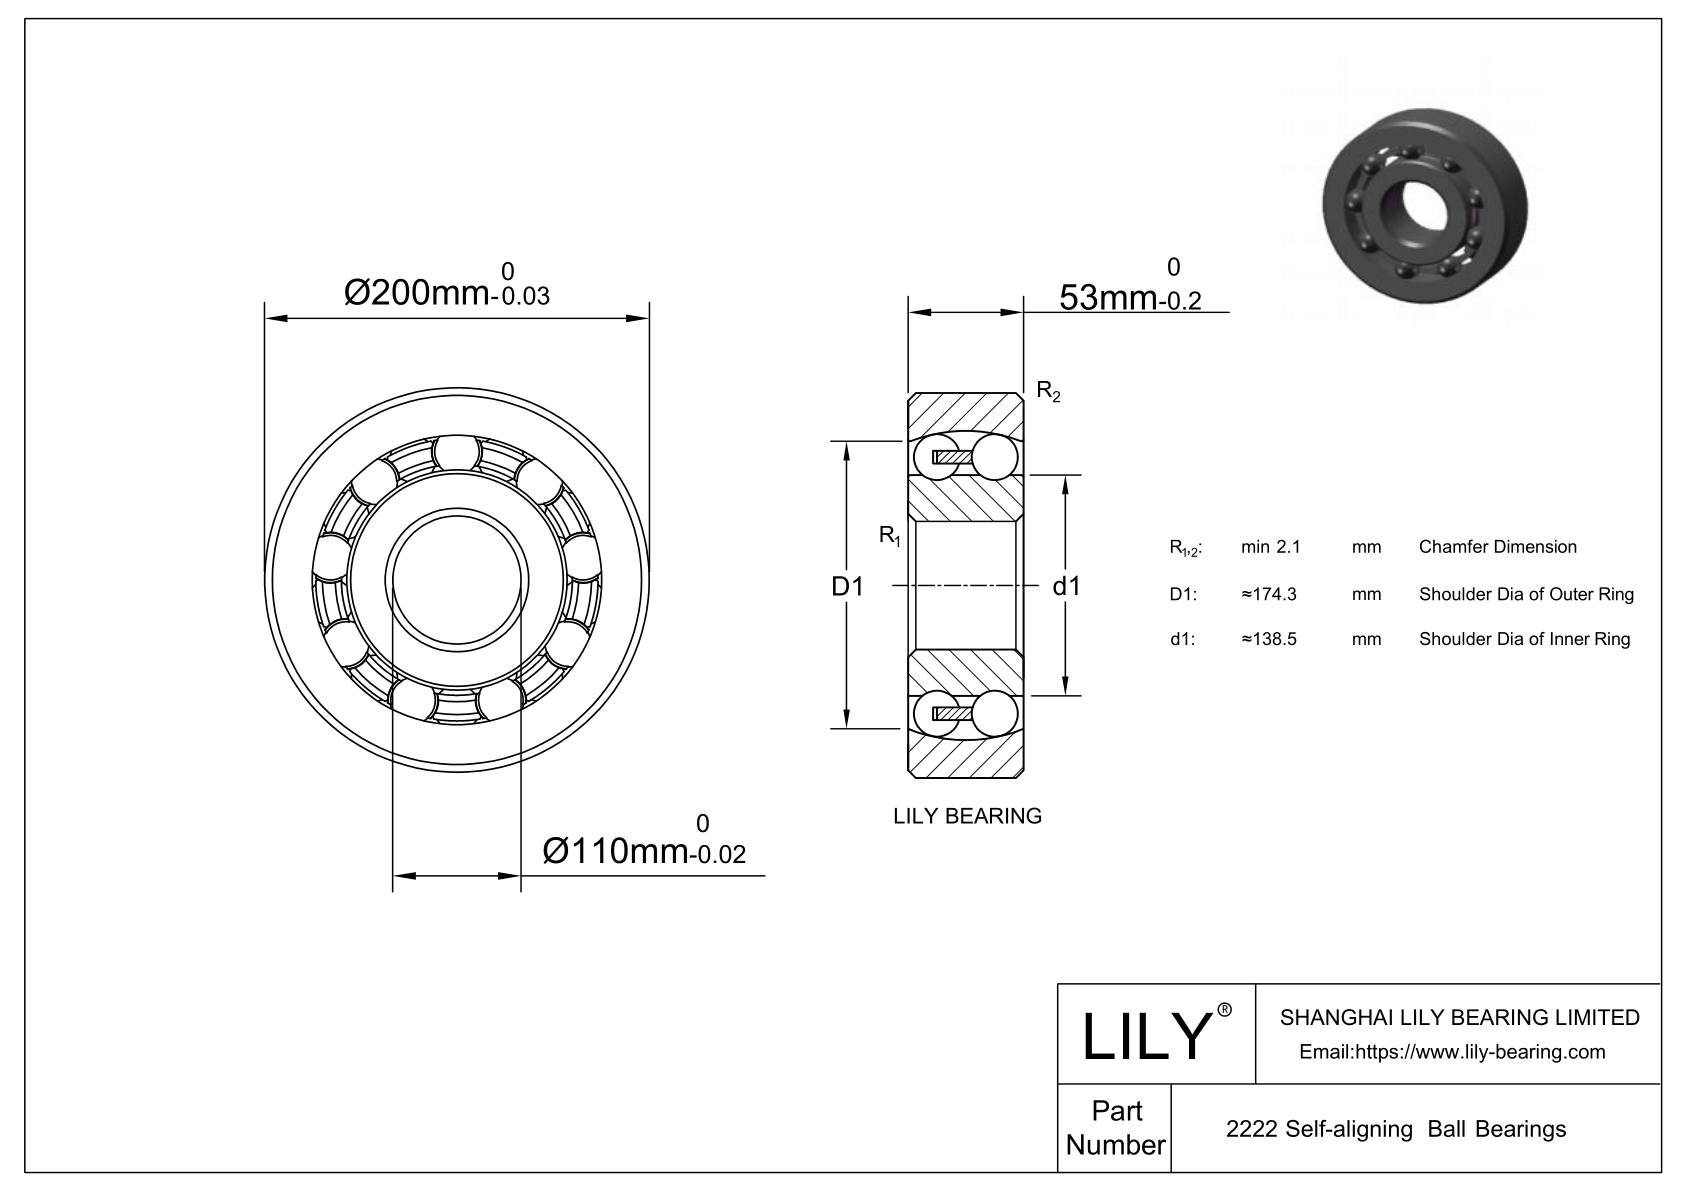 S2222 Stainless Steel Self Aligning Ball Bearings cad drawing